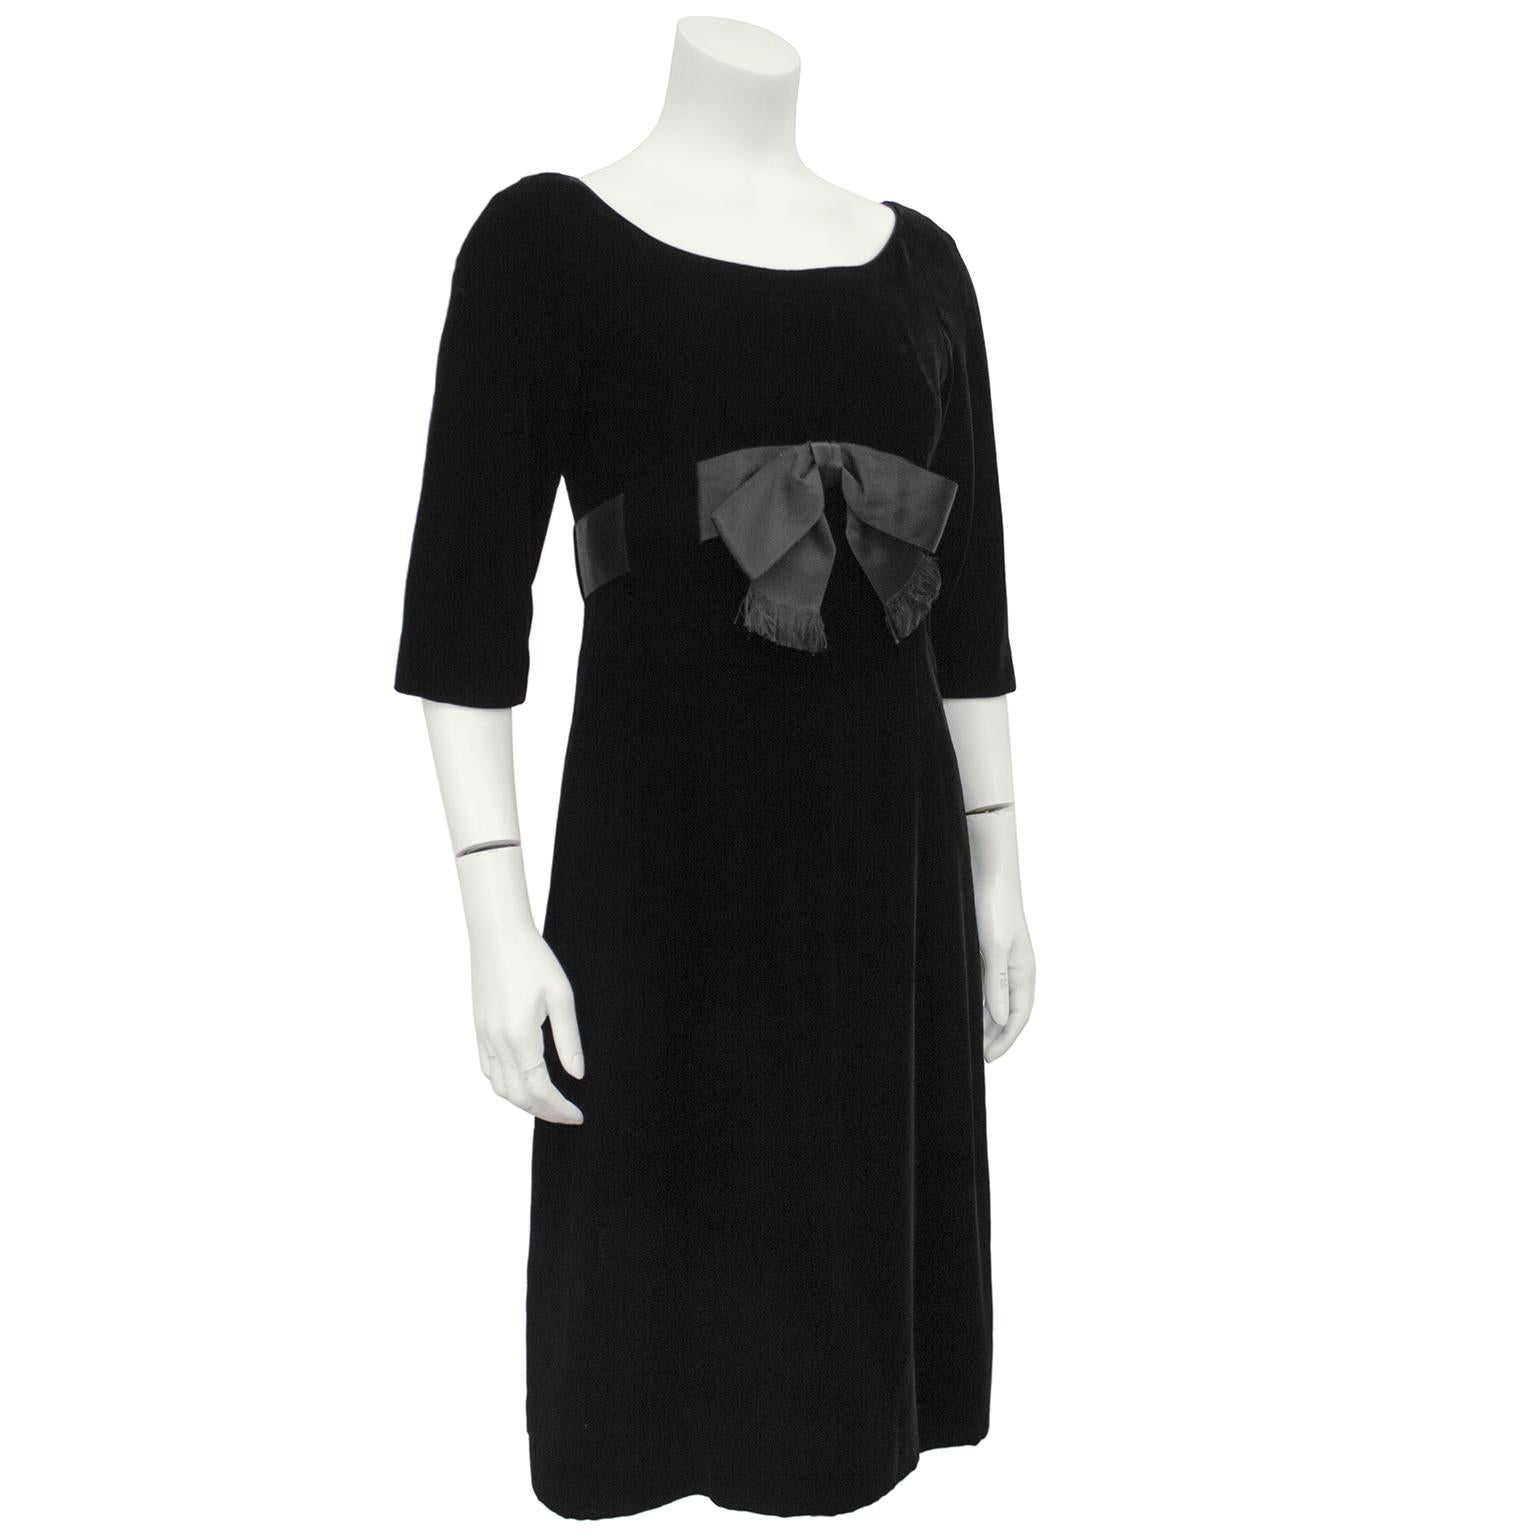 Early 1960's Mollie Parnis black velvet empire waist dress inspired by the Dior look dresses from the 60's. Scoop neckline, 3/4 sleeve, black satin wide ribbon sash with raw edged front bow fitted just below the bustline that overlaps the back